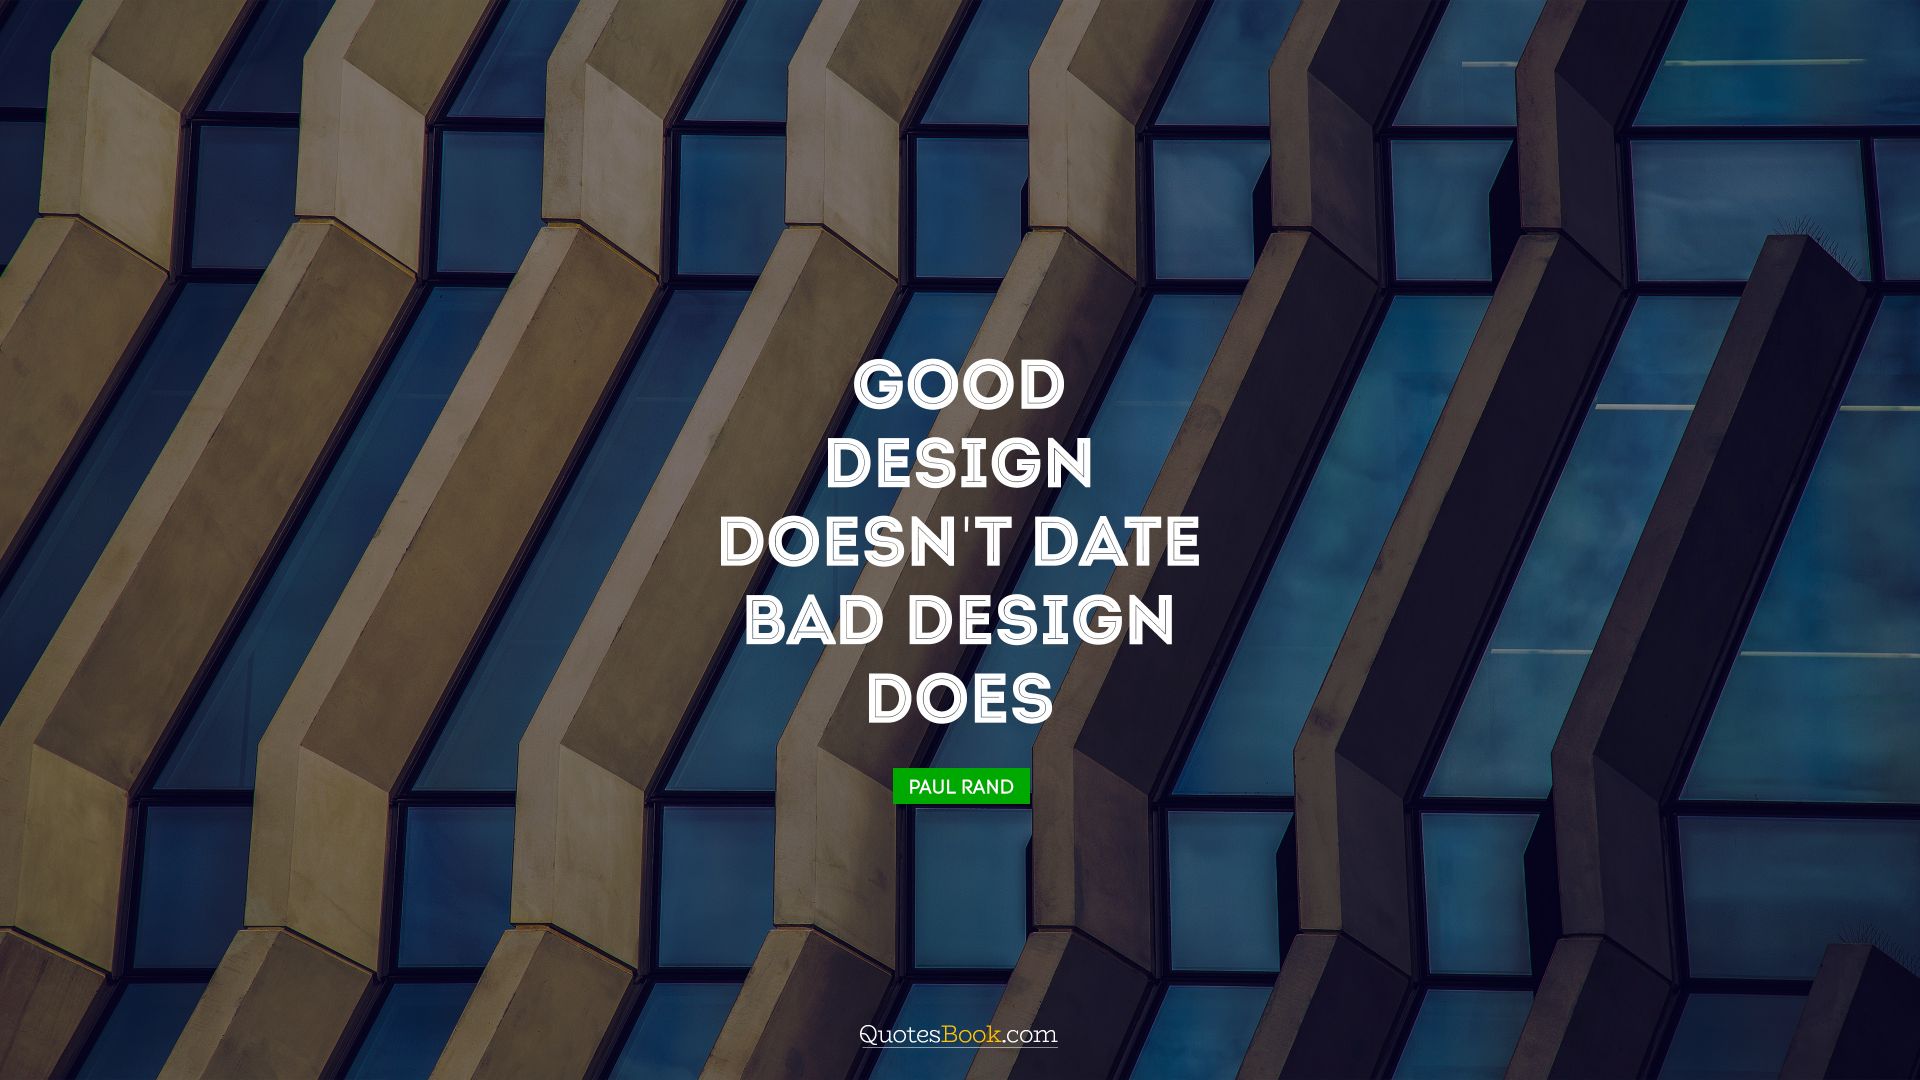 Good design doesn't date. Bad design does. - Quote by Paul Rand